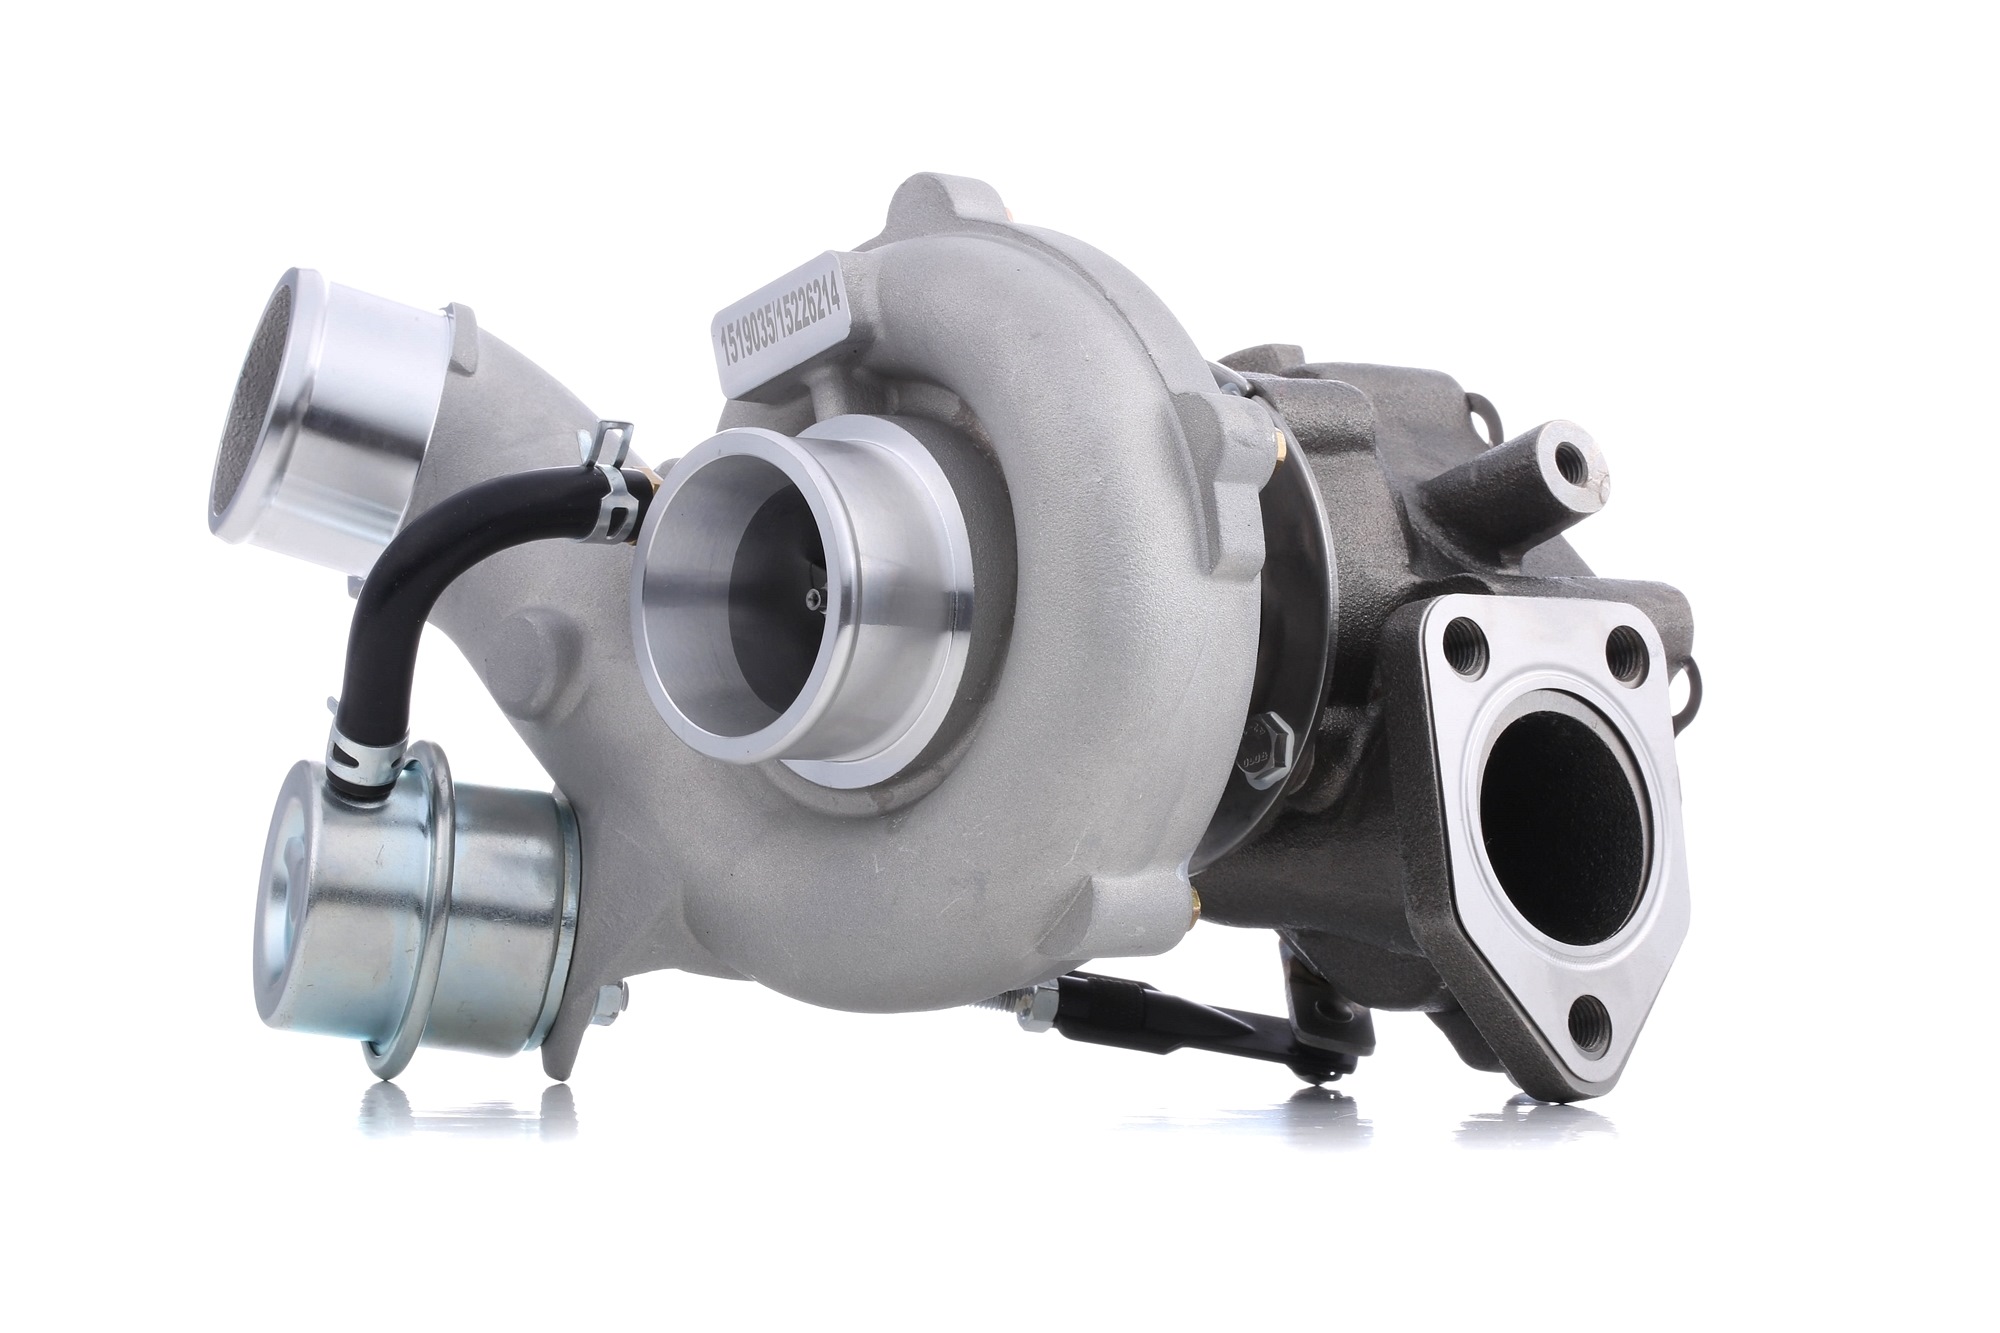 Image of RIDEX Turbocharger KIA 2234C0296 282004A101 Turbolader,Charger, charging system